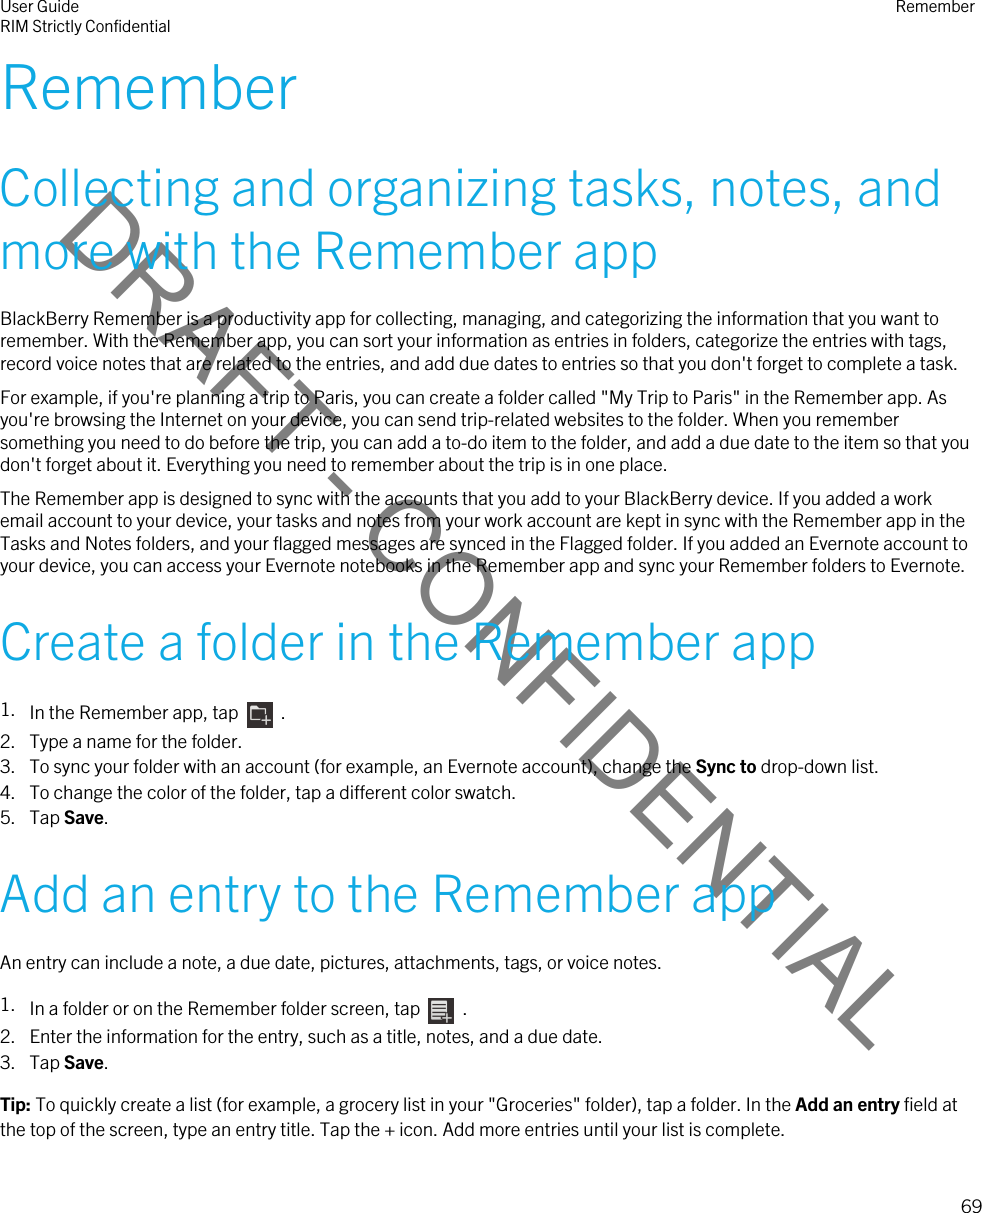 DRAFT - CONFIDENTIALRememberCollecting and organizing tasks, notes, and more with the Remember appBlackBerry Remember is a productivity app for collecting, managing, and categorizing the information that you want to remember. With the Remember app, you can sort your information as entries in folders, categorize the entries with tags, record voice notes that are related to the entries, and add due dates to entries so that you don&apos;t forget to complete a task.For example, if you&apos;re planning a trip to Paris, you can create a folder called &quot;My Trip to Paris&quot; in the Remember app. As you&apos;re browsing the Internet on your device, you can send trip-related websites to the folder. When you remember something you need to do before the trip, you can add a to-do item to the folder, and add a due date to the item so that you don&apos;t forget about it. Everything you need to remember about the trip is in one place.The Remember app is designed to sync with the accounts that you add to your BlackBerry device. If you added a work email account to your device, your tasks and notes from your work account are kept in sync with the Remember app in the Tasks and Notes folders, and your flagged messages are synced in the Flagged folder. If you added an Evernote account to your device, you can access your Evernote notebooks in the Remember app and sync your Remember folders to Evernote.Create a folder in the Remember app1. In the Remember app, tap    .2. Type a name for the folder.3. To sync your folder with an account (for example, an Evernote account), change the Sync to drop-down list.4. To change the color of the folder, tap a different color swatch.5. Tap Save.Add an entry to the Remember appAn entry can include a note, a due date, pictures, attachments, tags, or voice notes.1. In a folder or on the Remember folder screen, tap    .2. Enter the information for the entry, such as a title, notes, and a due date.3. Tap Save.Tip: To quickly create a list (for example, a grocery list in your &quot;Groceries&quot; folder), tap a folder. In the Add an entry field at the top of the screen, type an entry title. Tap the + icon. Add more entries until your list is complete.User GuideRIM Strictly Confidential Remember69 